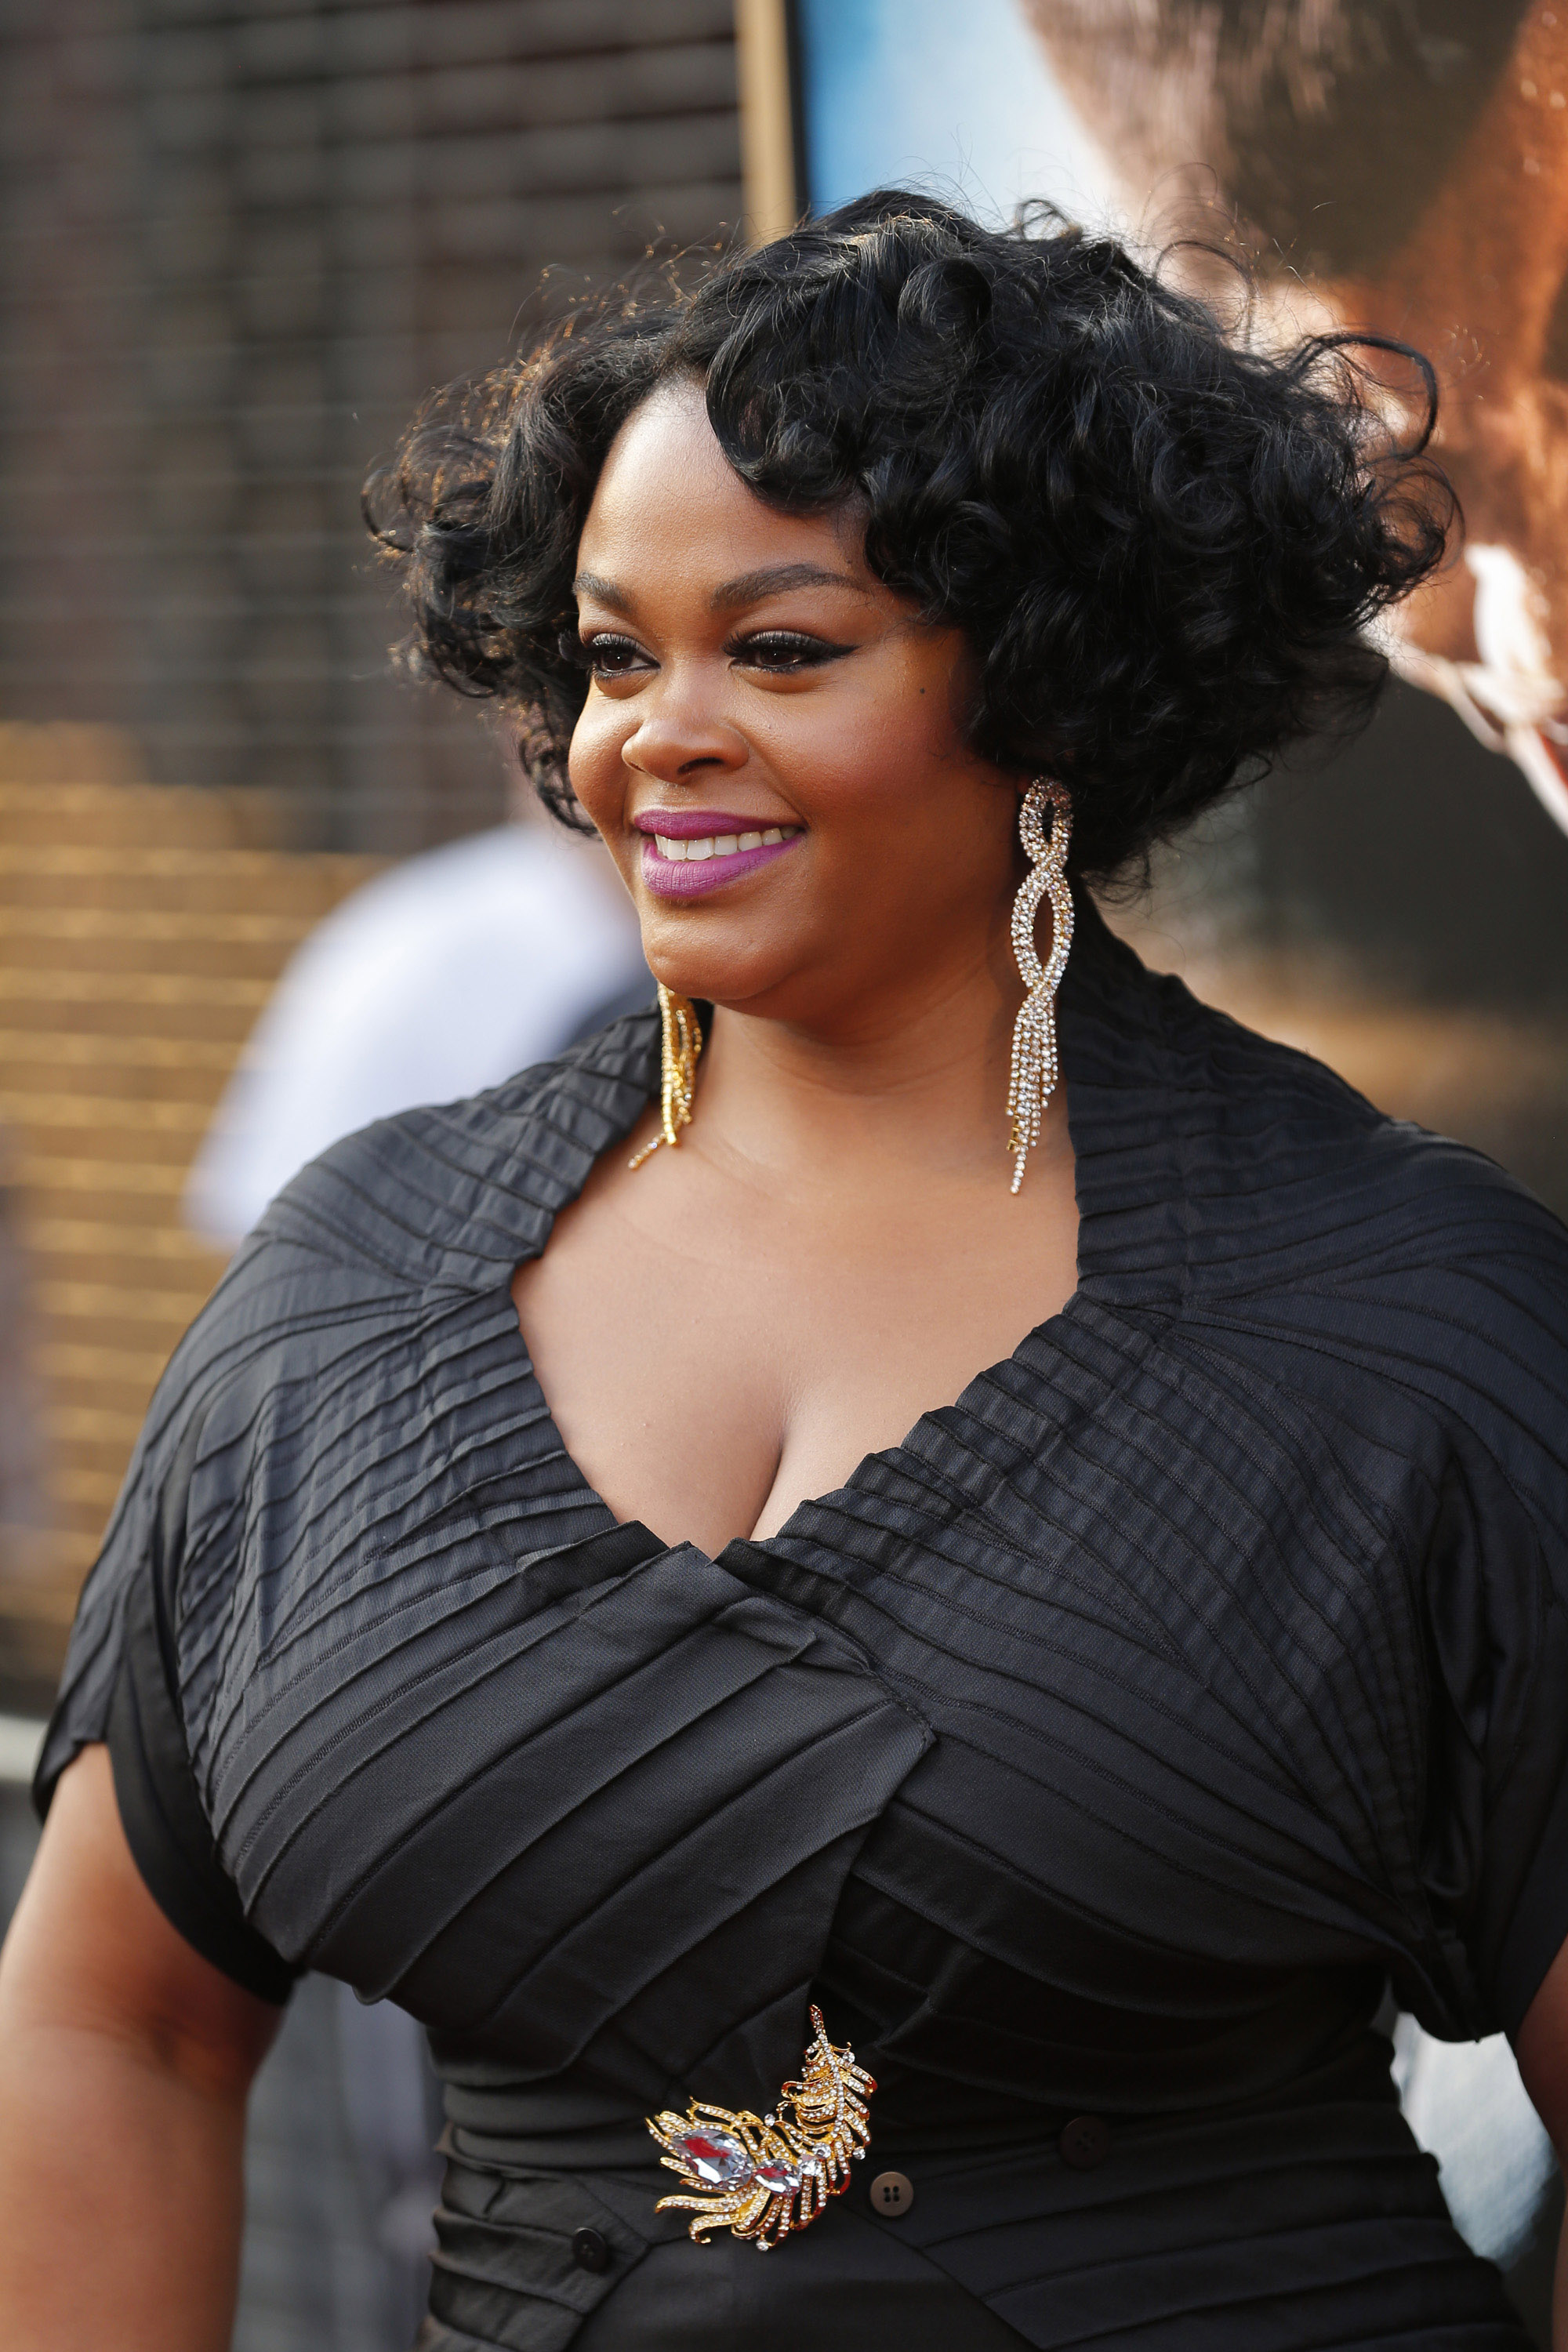 Jill Scott attends the "Get On Up" premiere at The Apollo Theater on July 21, 2014, in New York City. | Source: Getty Images